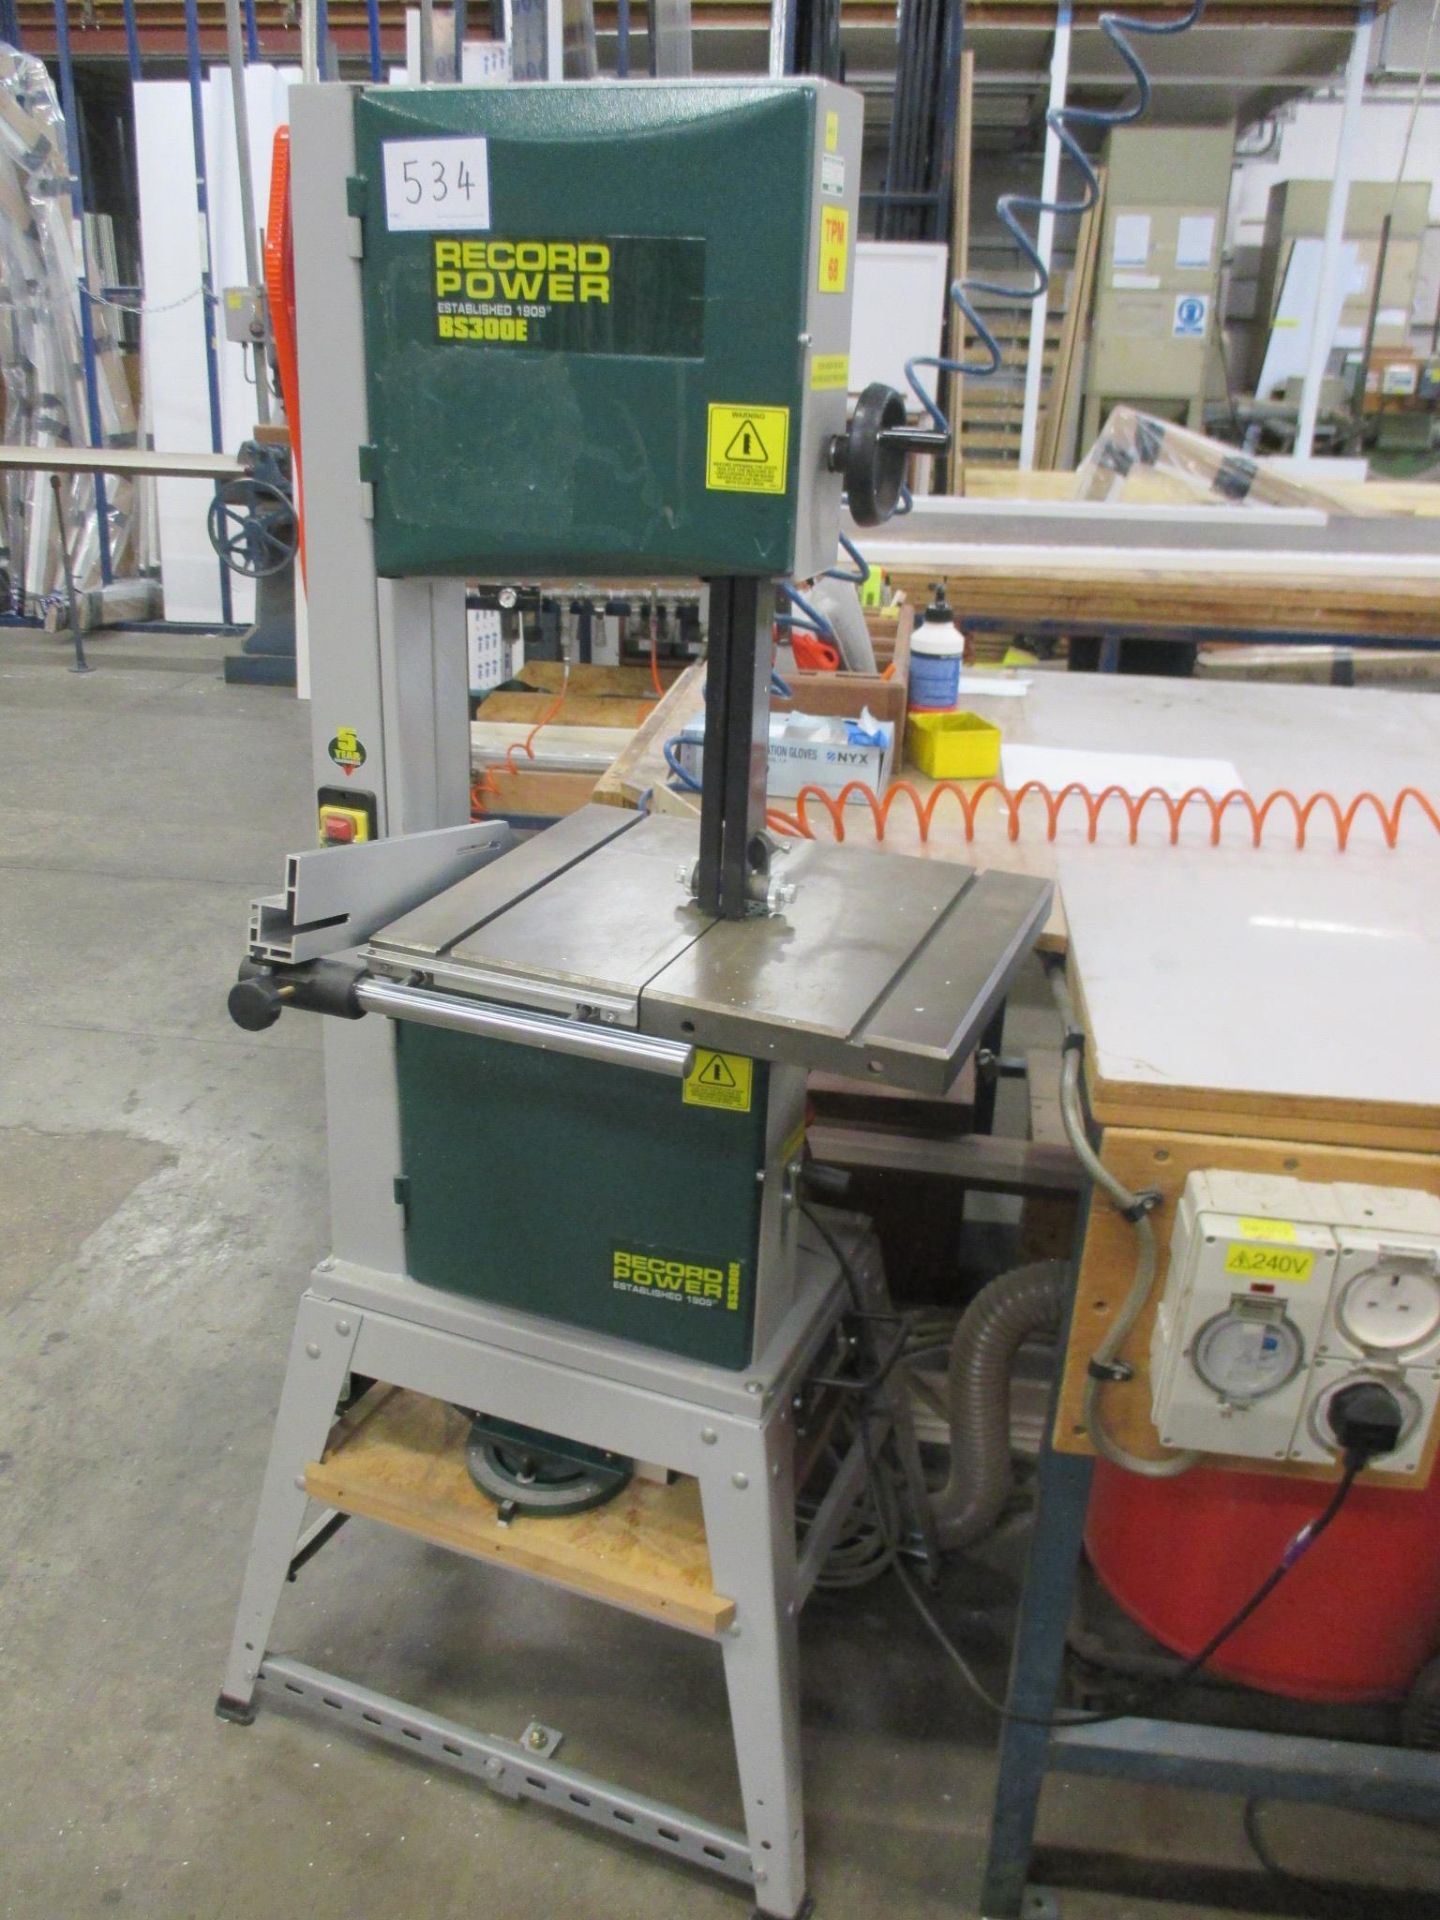 1: Record Power, BS300E, 12" Bandsaw, Serial Number: 17050312003